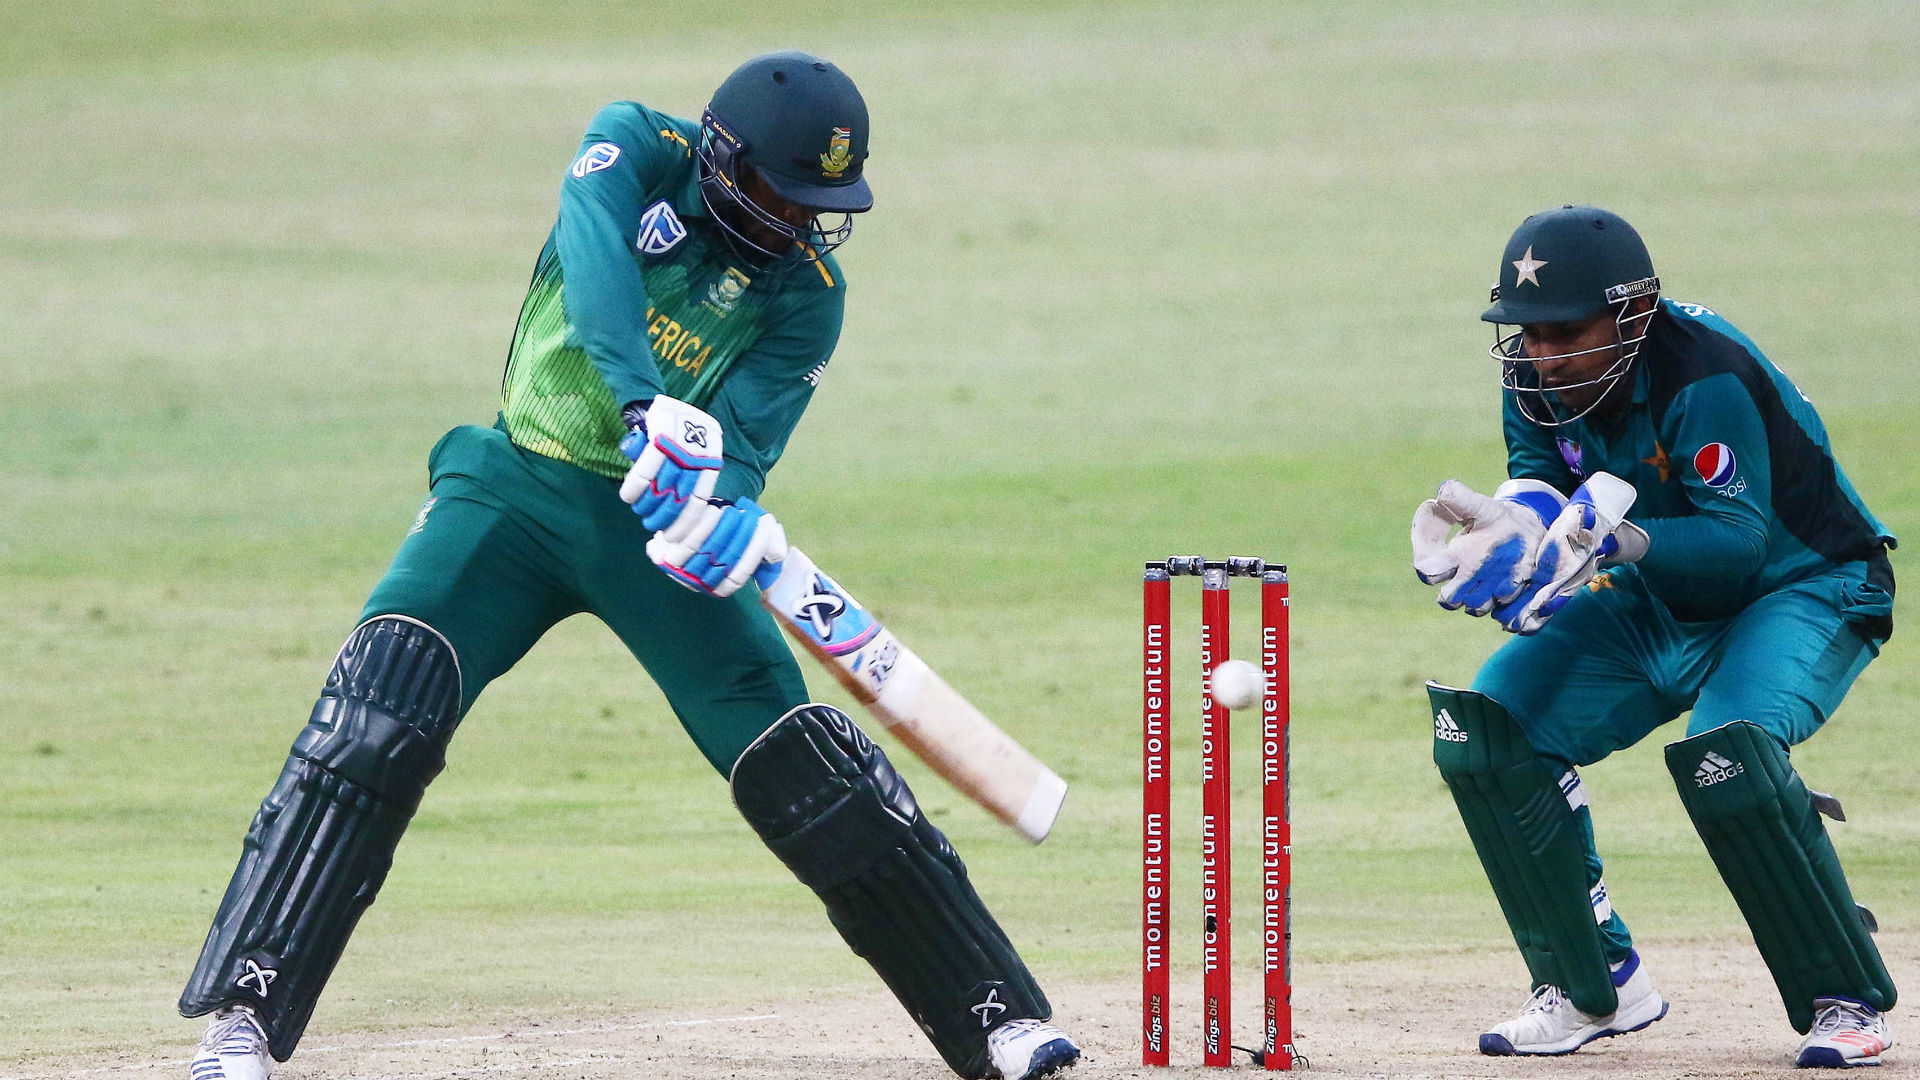 South Africa levelled their ODI series against Pakistan thanks to an impressive recovery from Andile Phehlukwayo and Rassie van der Dussen.